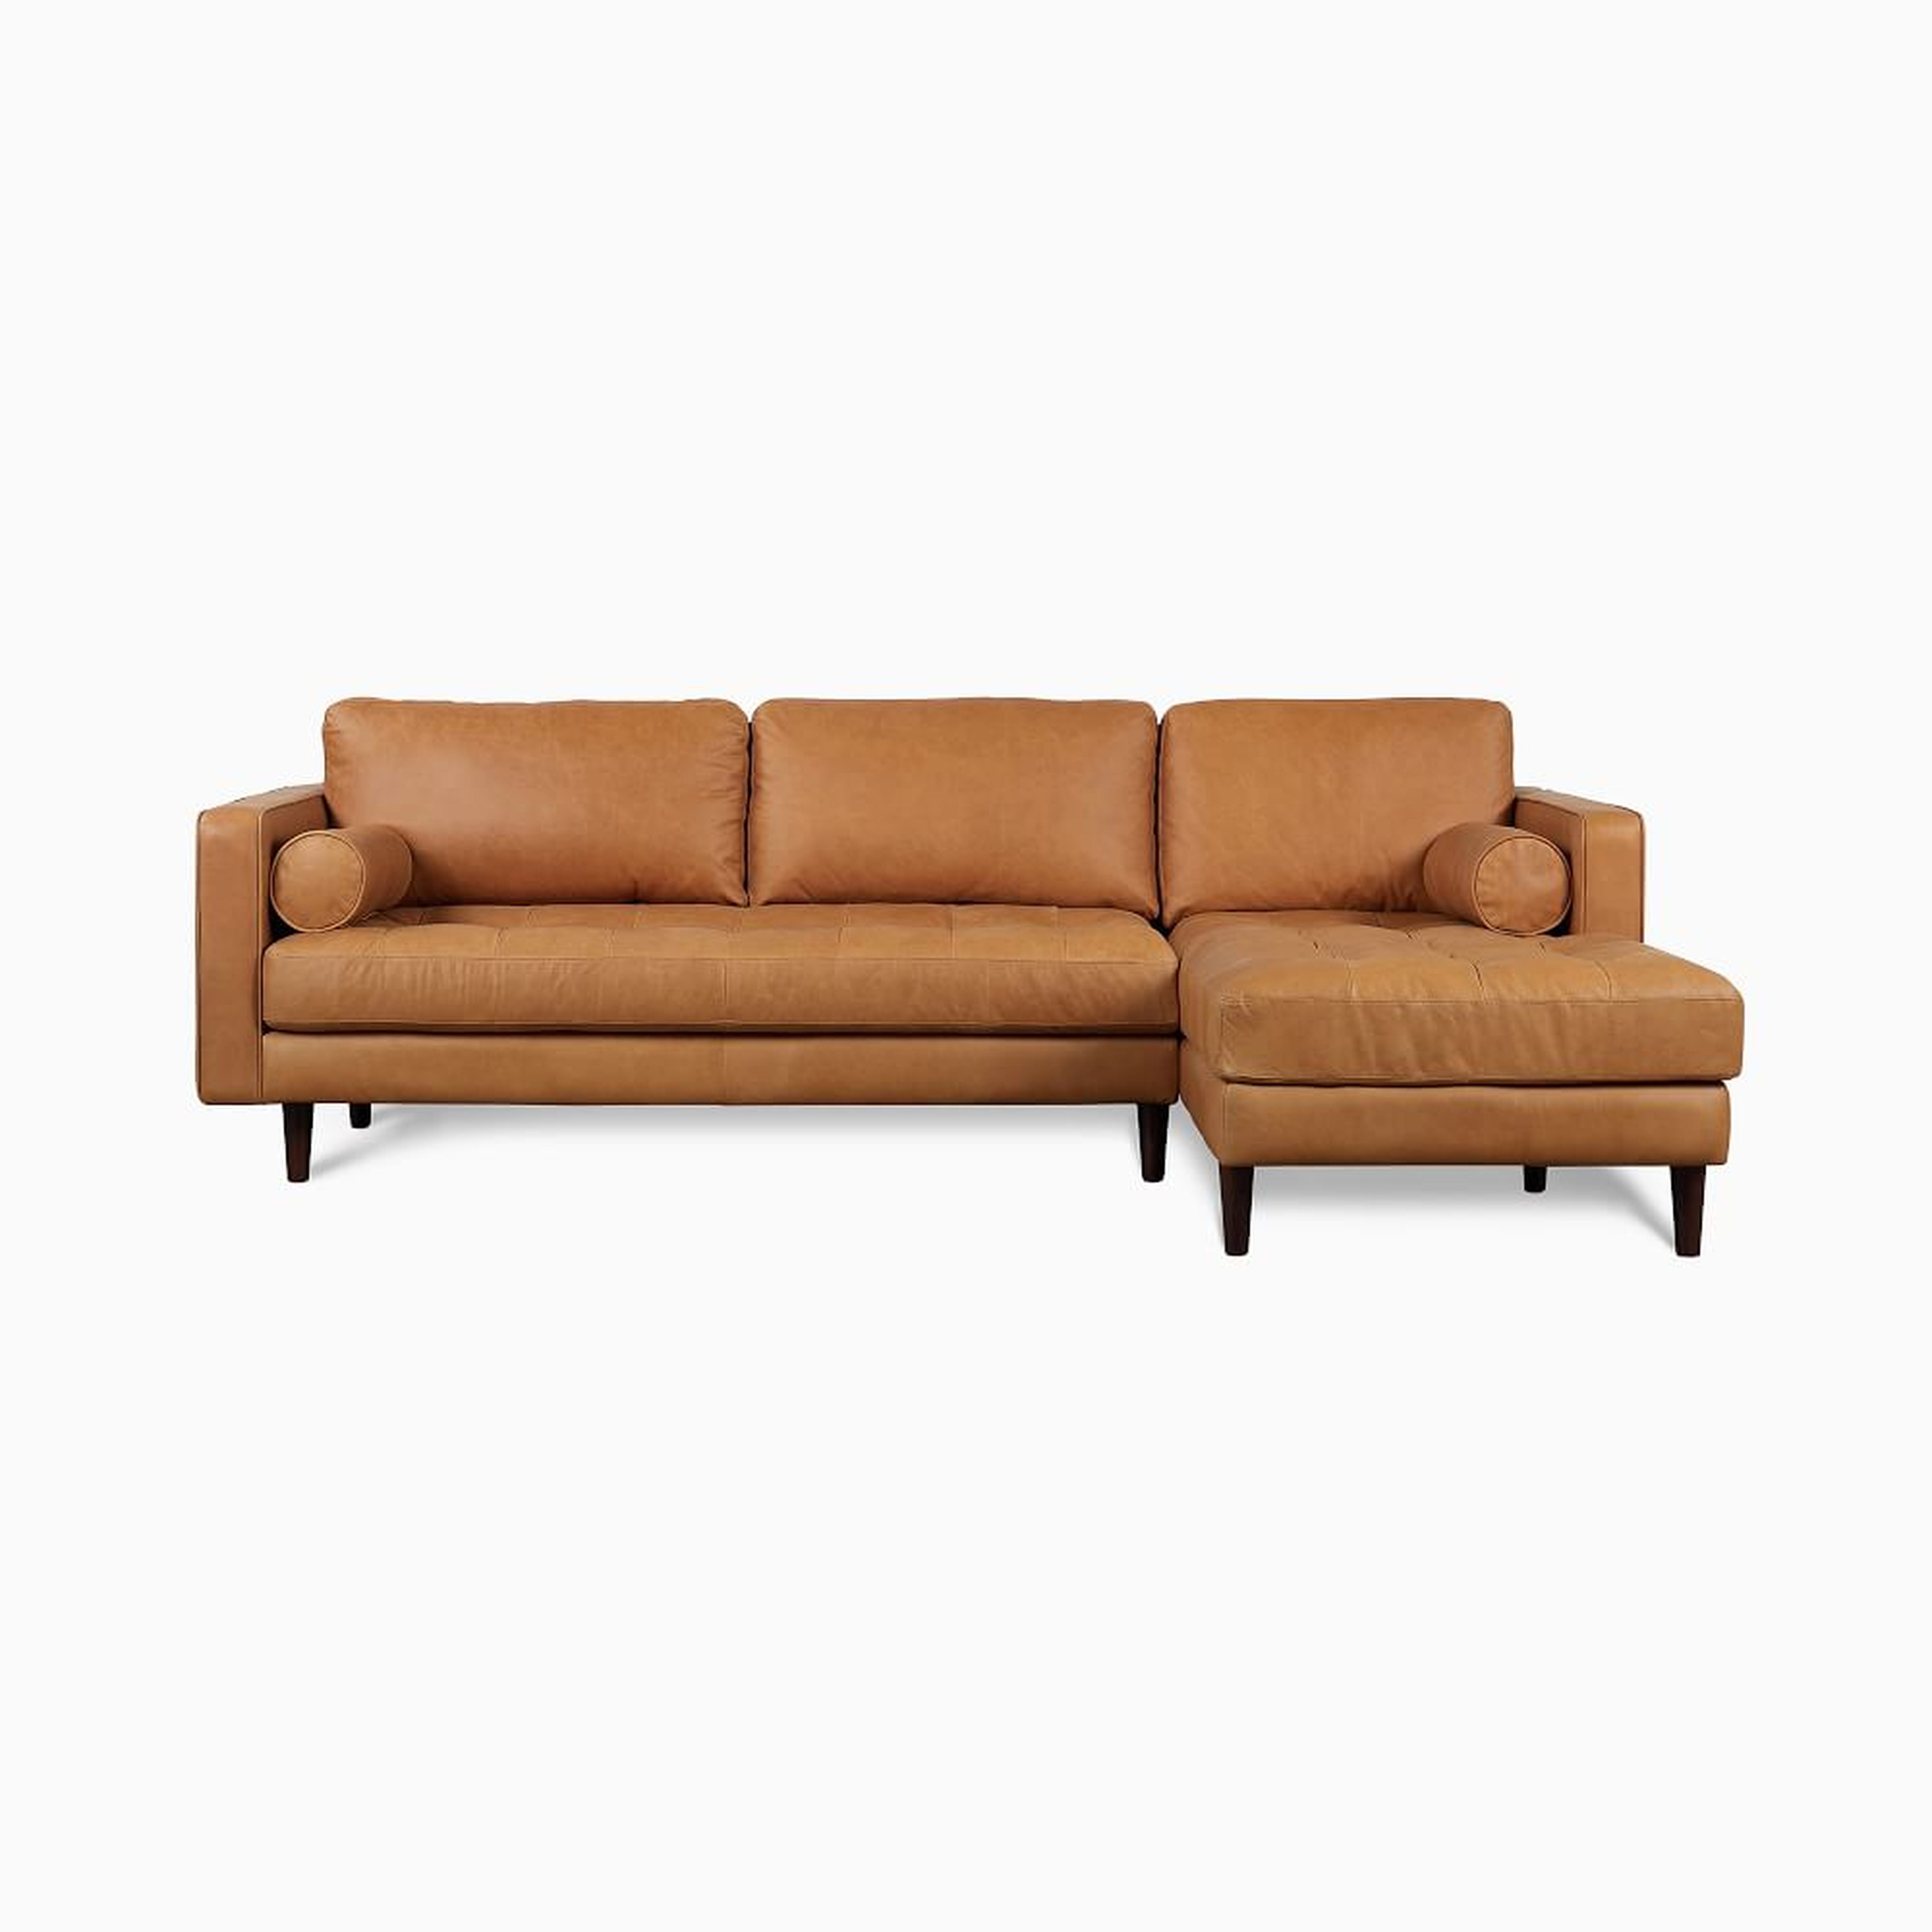 Dennes 102" Leather Right 2-Piece Chaise Sectional, Charme Leather, Tan, Walnut - West Elm